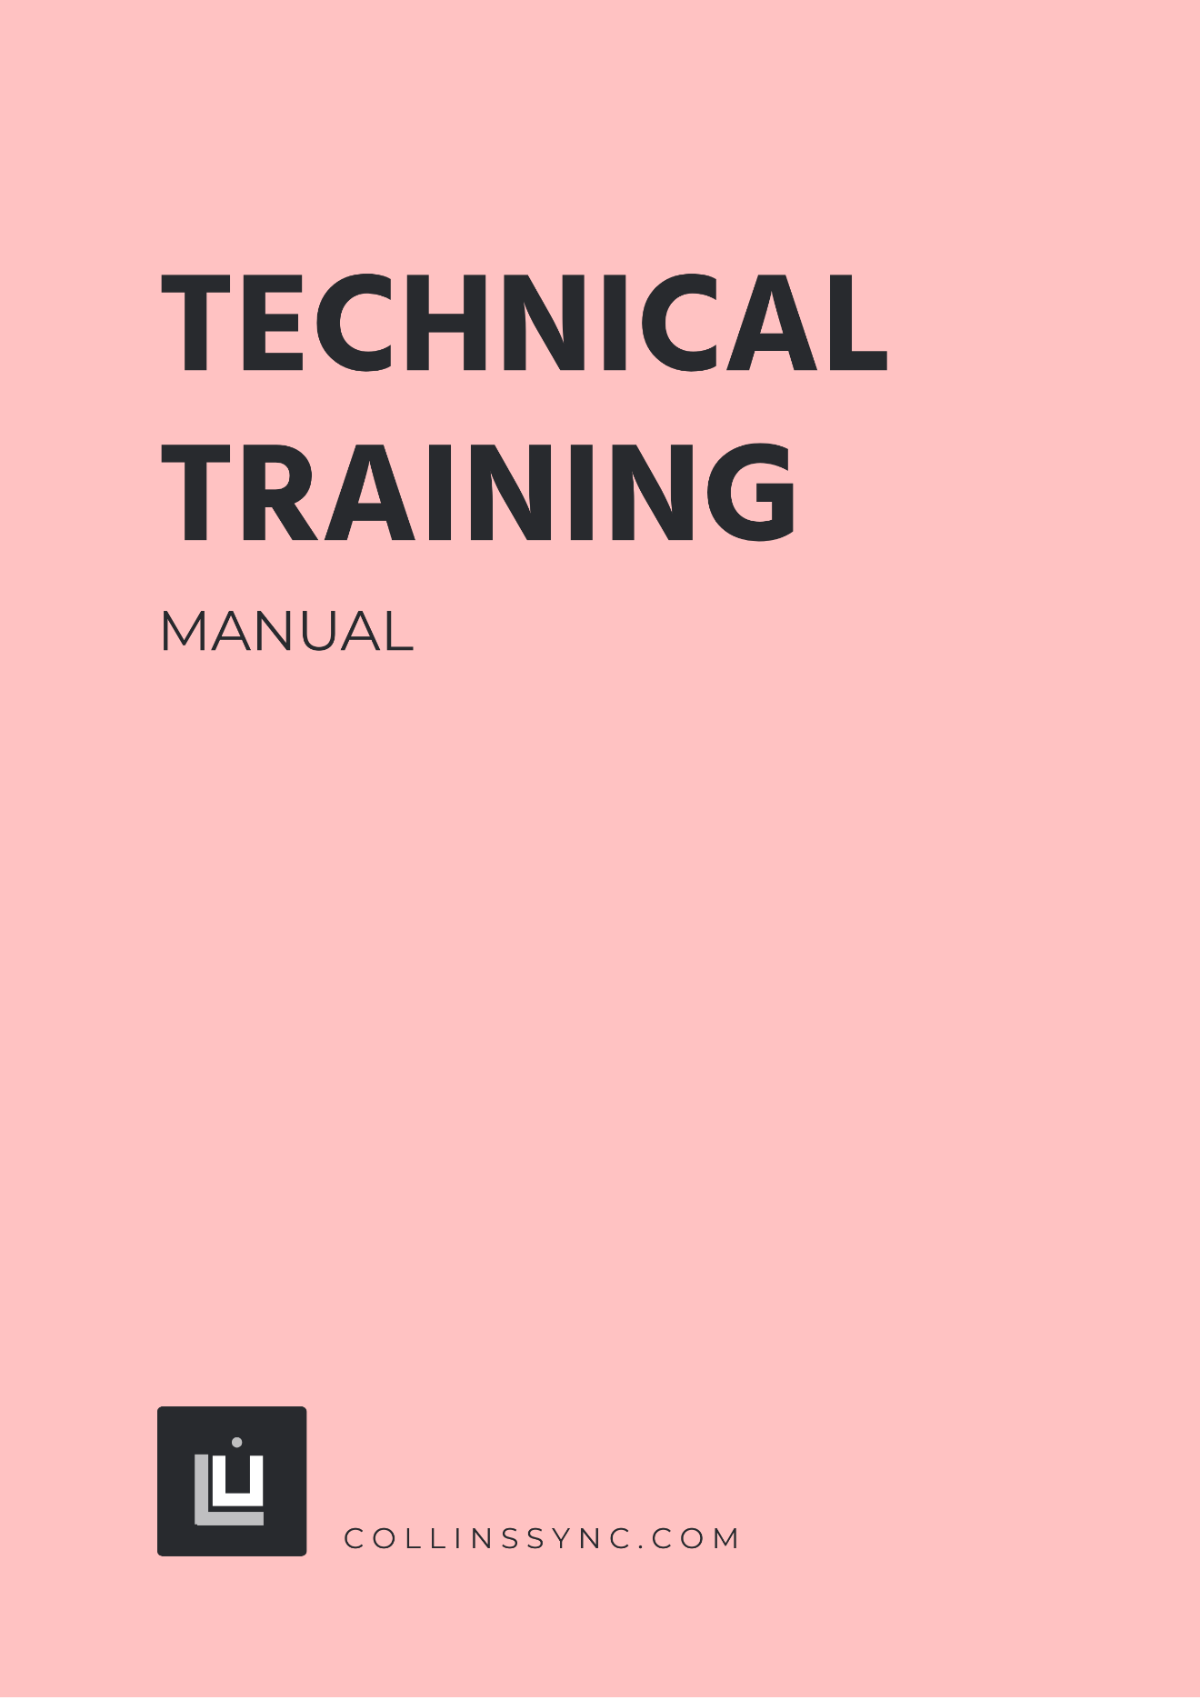 Technical Training Manual Template